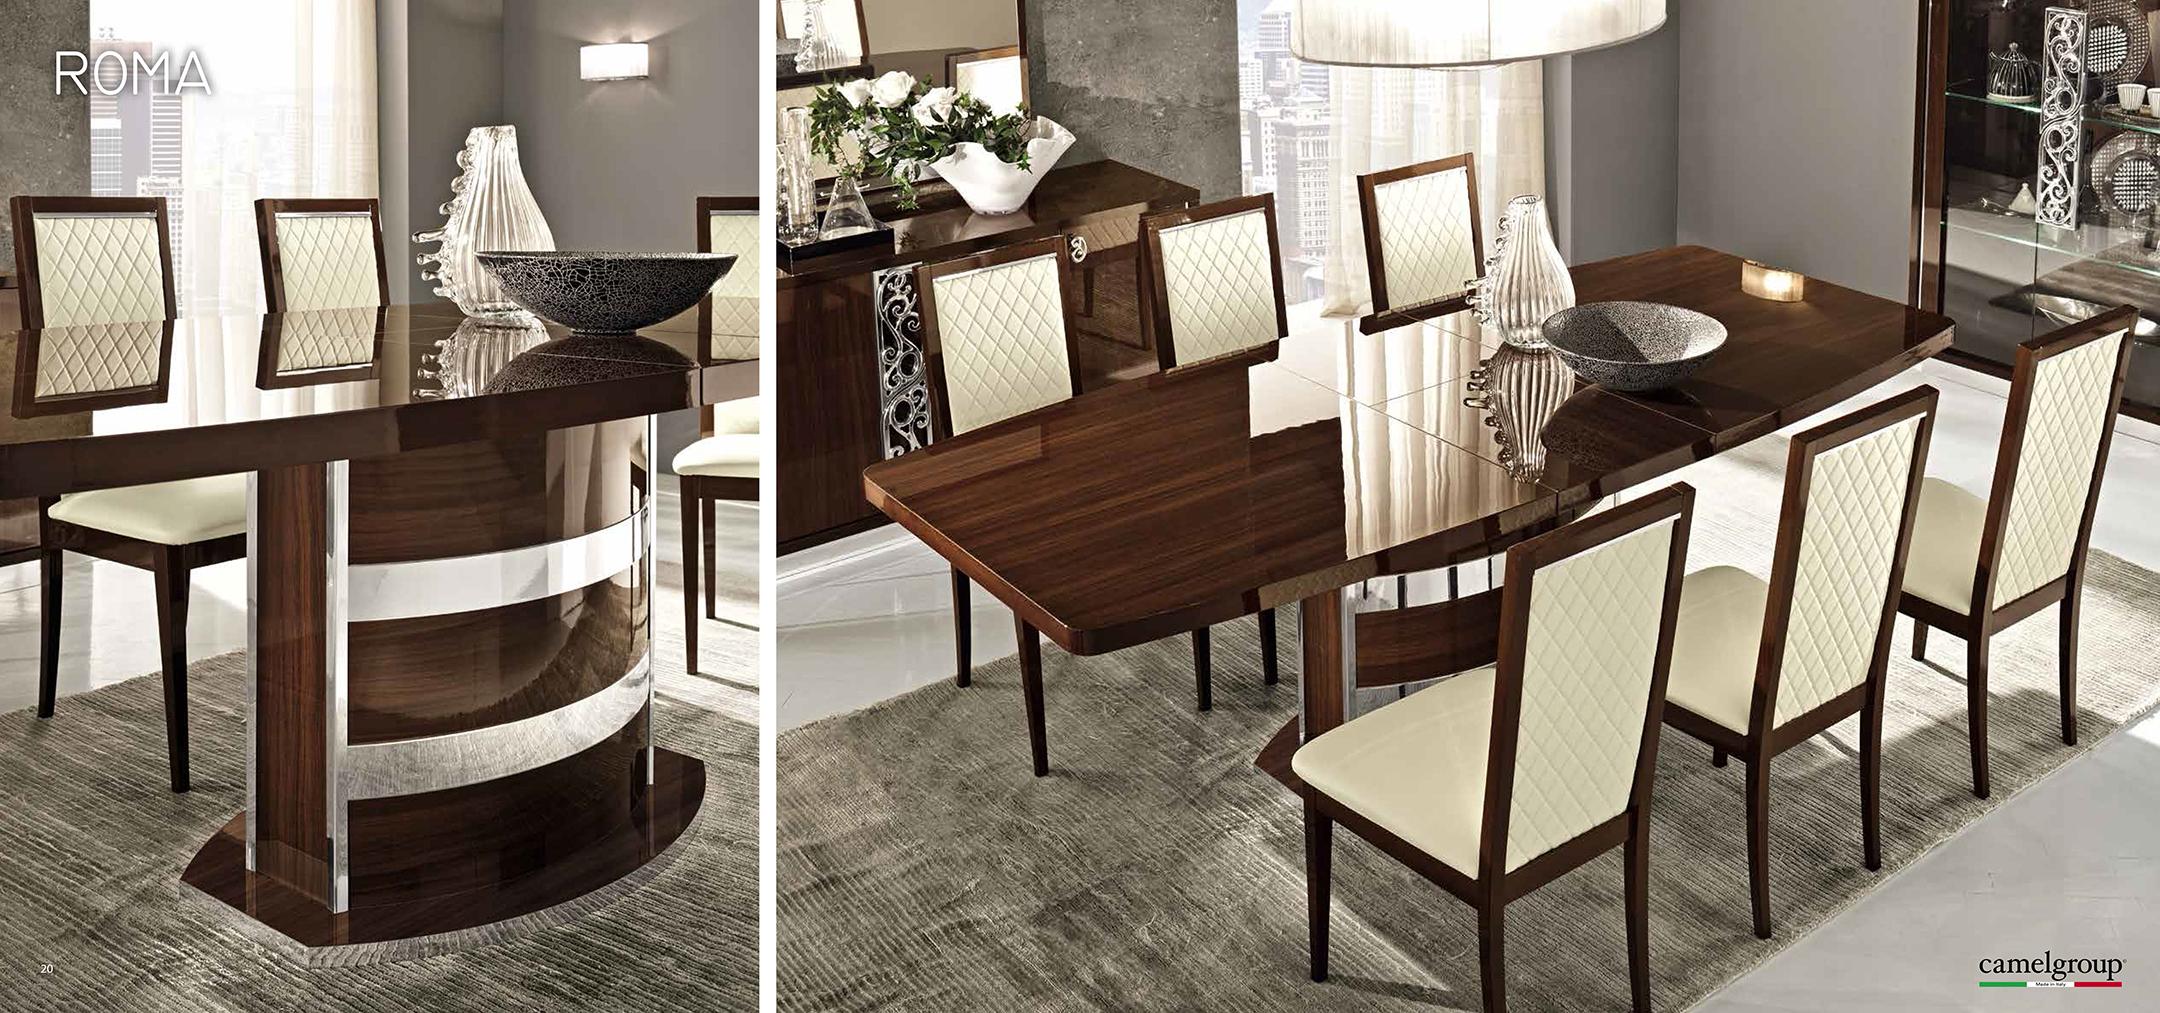 

    
ESF Roma High Gloss Walnut Lacquer Finish Dining Room Set 8 Pcs Made in Italy
